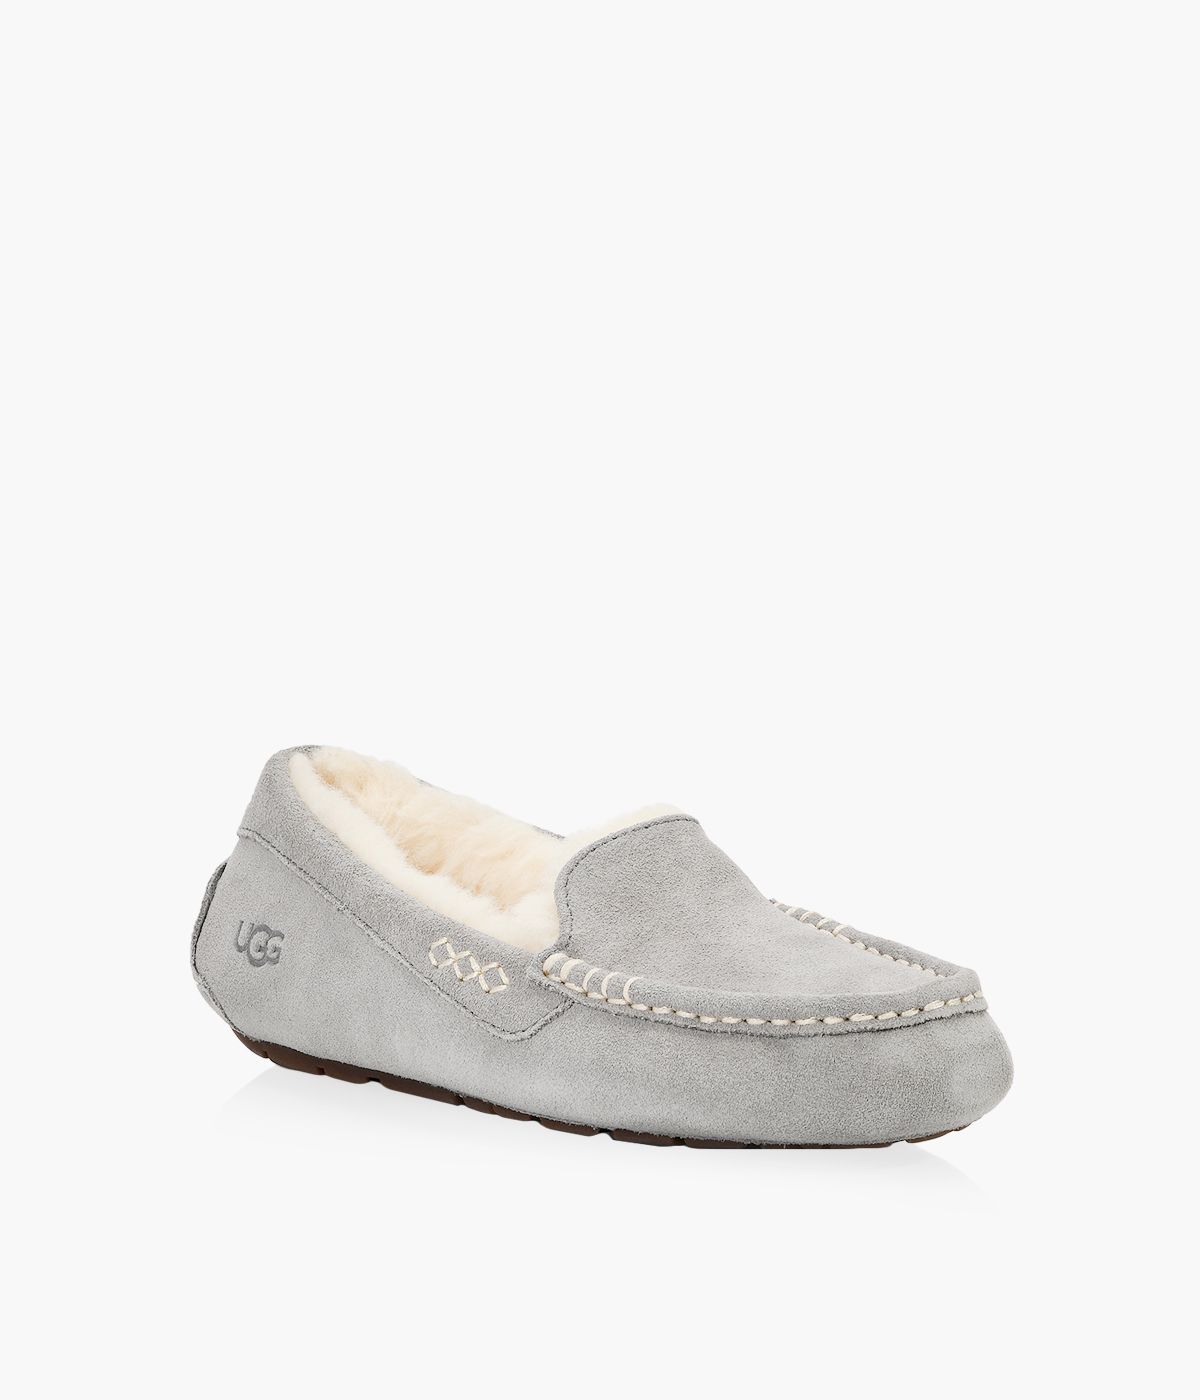 UGG ANSLEY - Suede | Browns Shoes